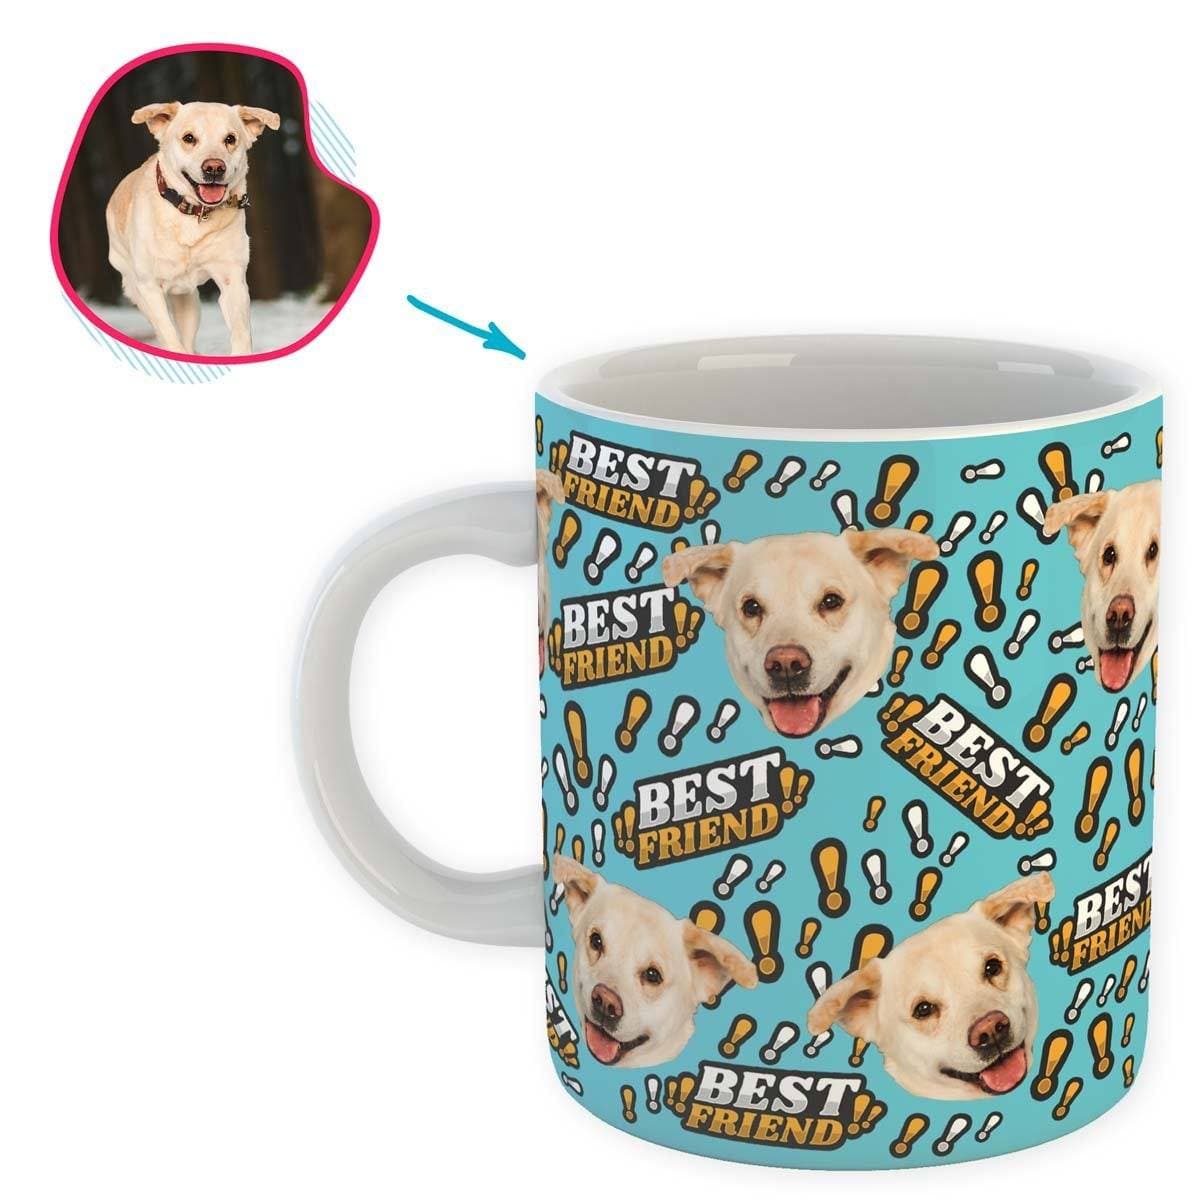 blue Best Friend mug personalized with photo of face printed on it